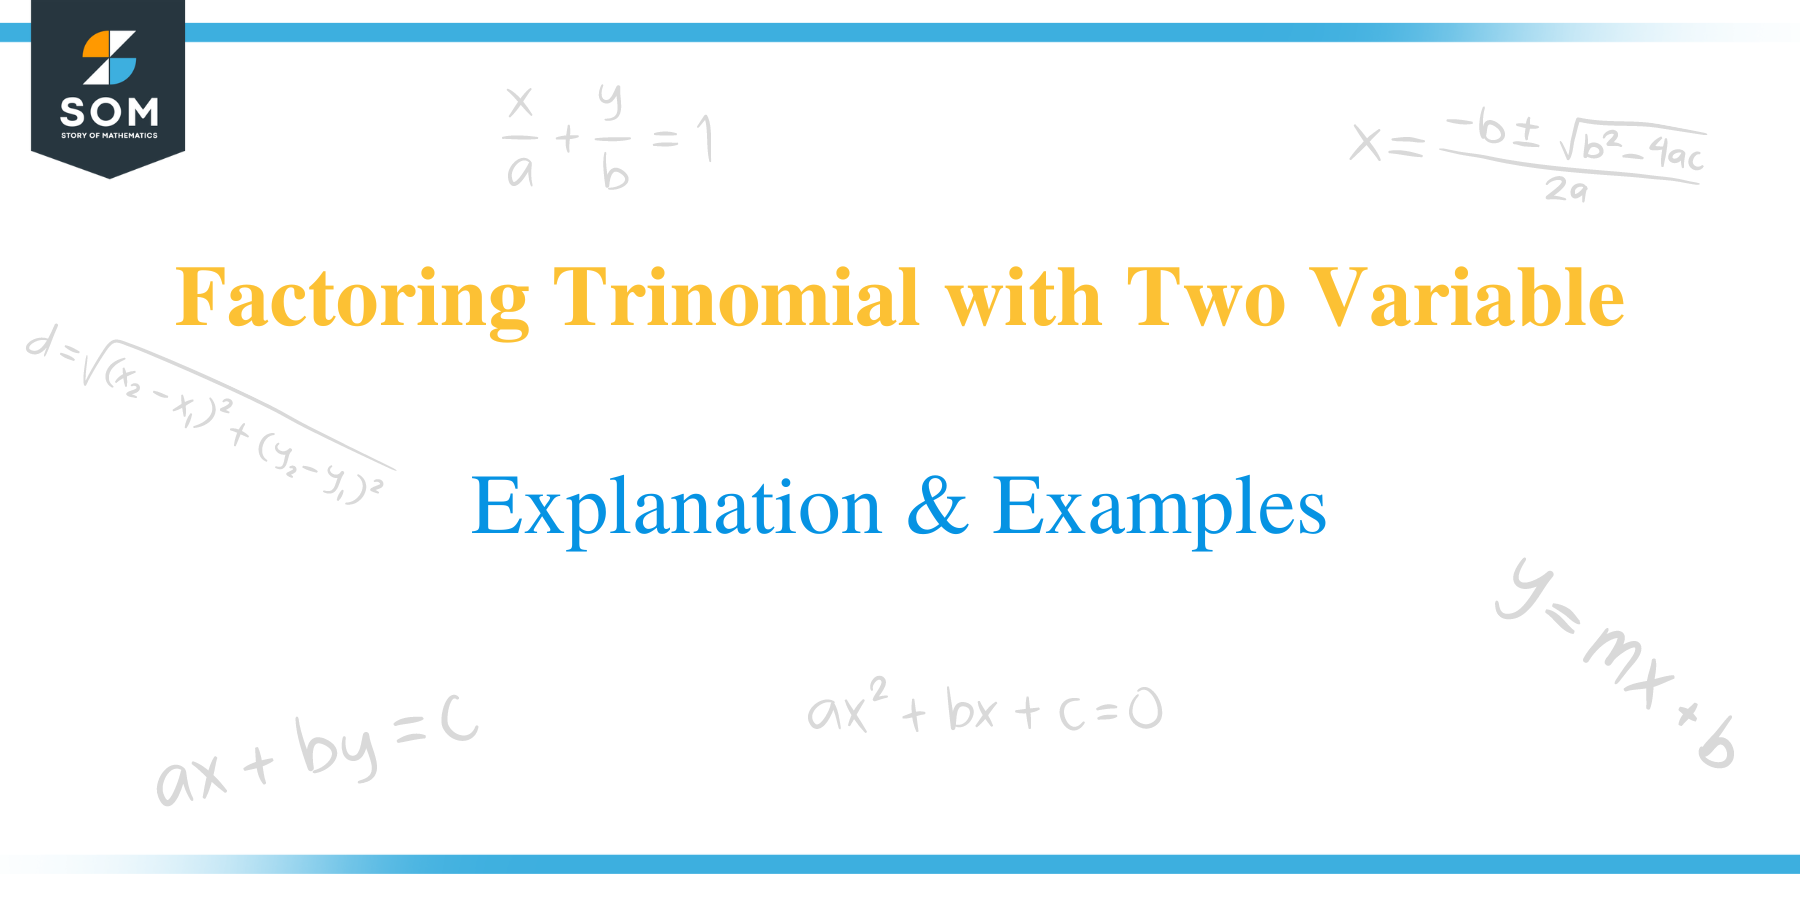 Factoring Trinomial with Two variable title